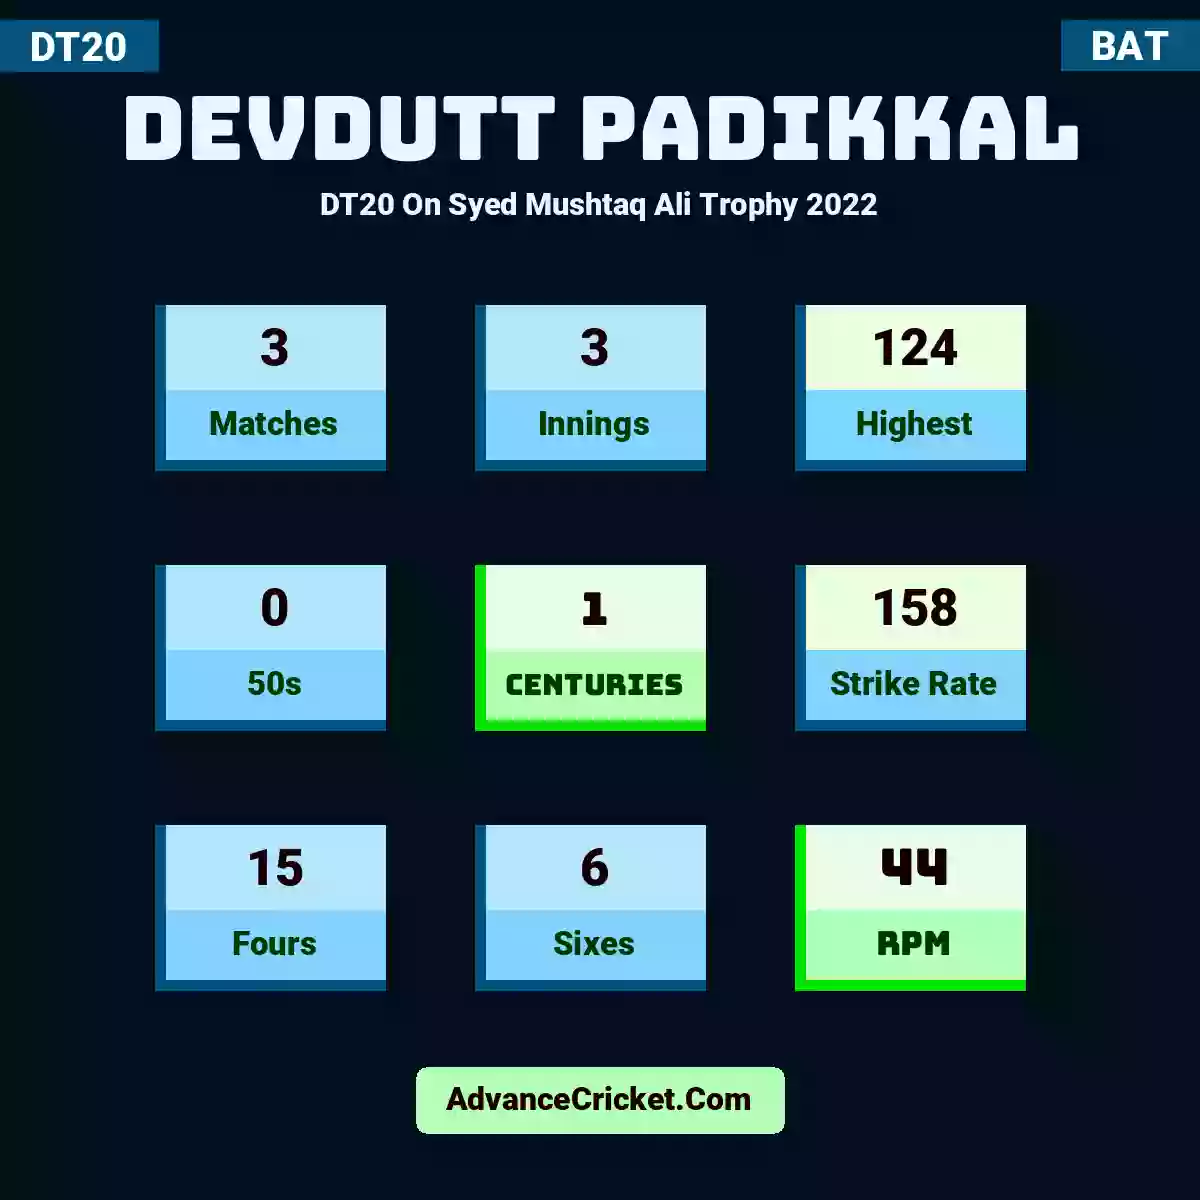 Devdutt Padikkal DT20  On Syed Mushtaq Ali Trophy 2022, Devdutt Padikkal played 3 matches, scored 124 runs as highest, 0 half-centuries, and 1 centuries, with a strike rate of 158. D.Padikkal hit 15 fours and 6 sixes, with an RPM of 44.